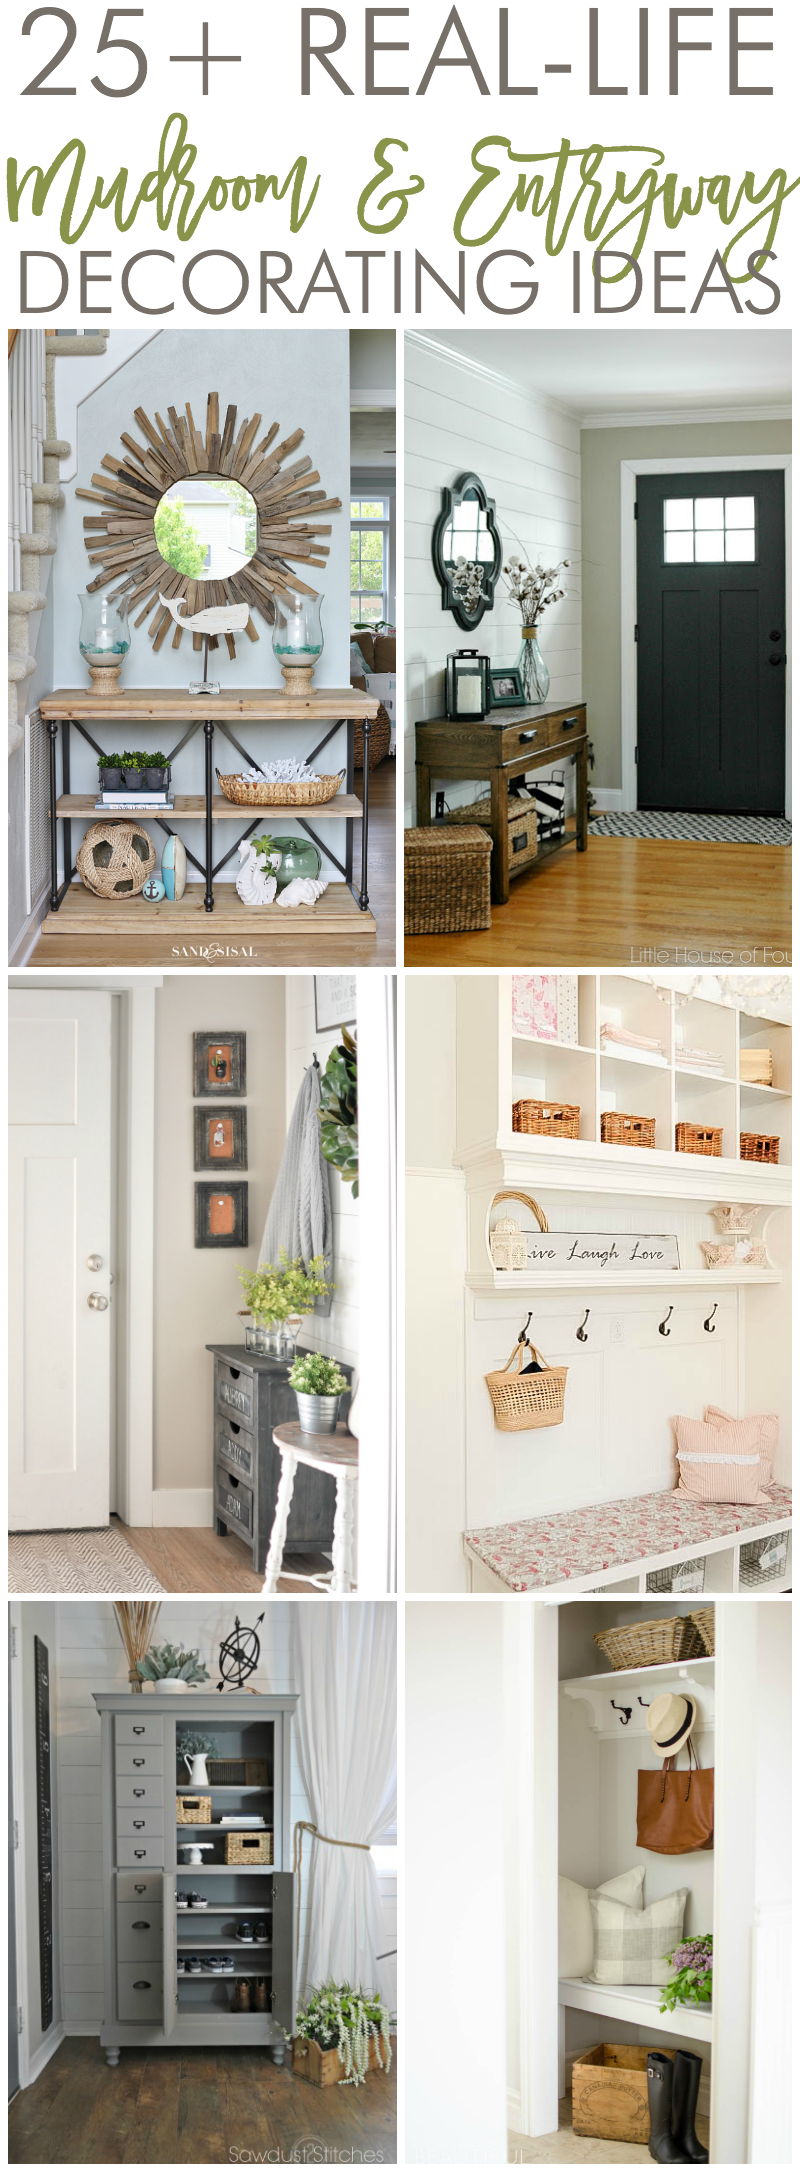 25+ real-life mudroom and entryway decorating ideas by bloggers including mudroom build plans and shoe storage plans